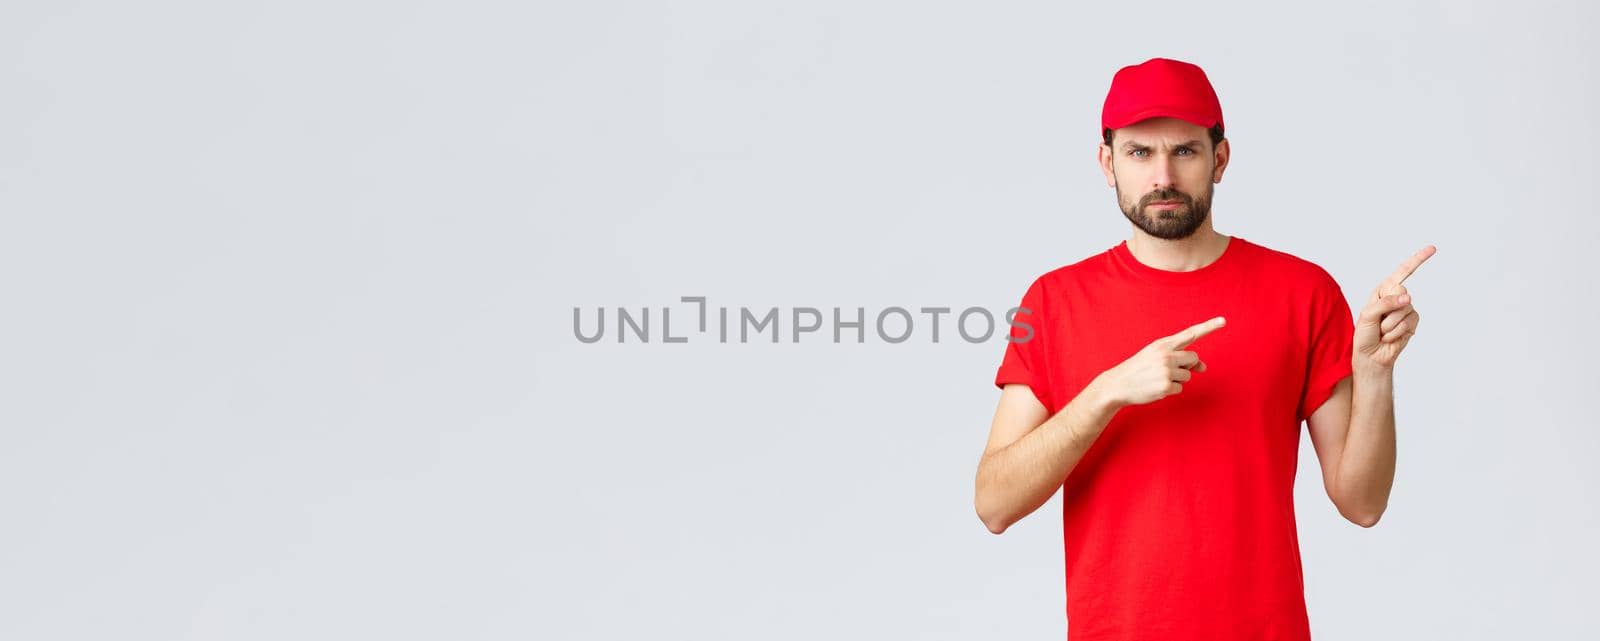 Online shopping, delivery during quarantine and takeaway concept. Displeased angry courier in red uniform cap and t-shirt, frowning grumpy, pointing fingers right in disapproval, feel bothered.